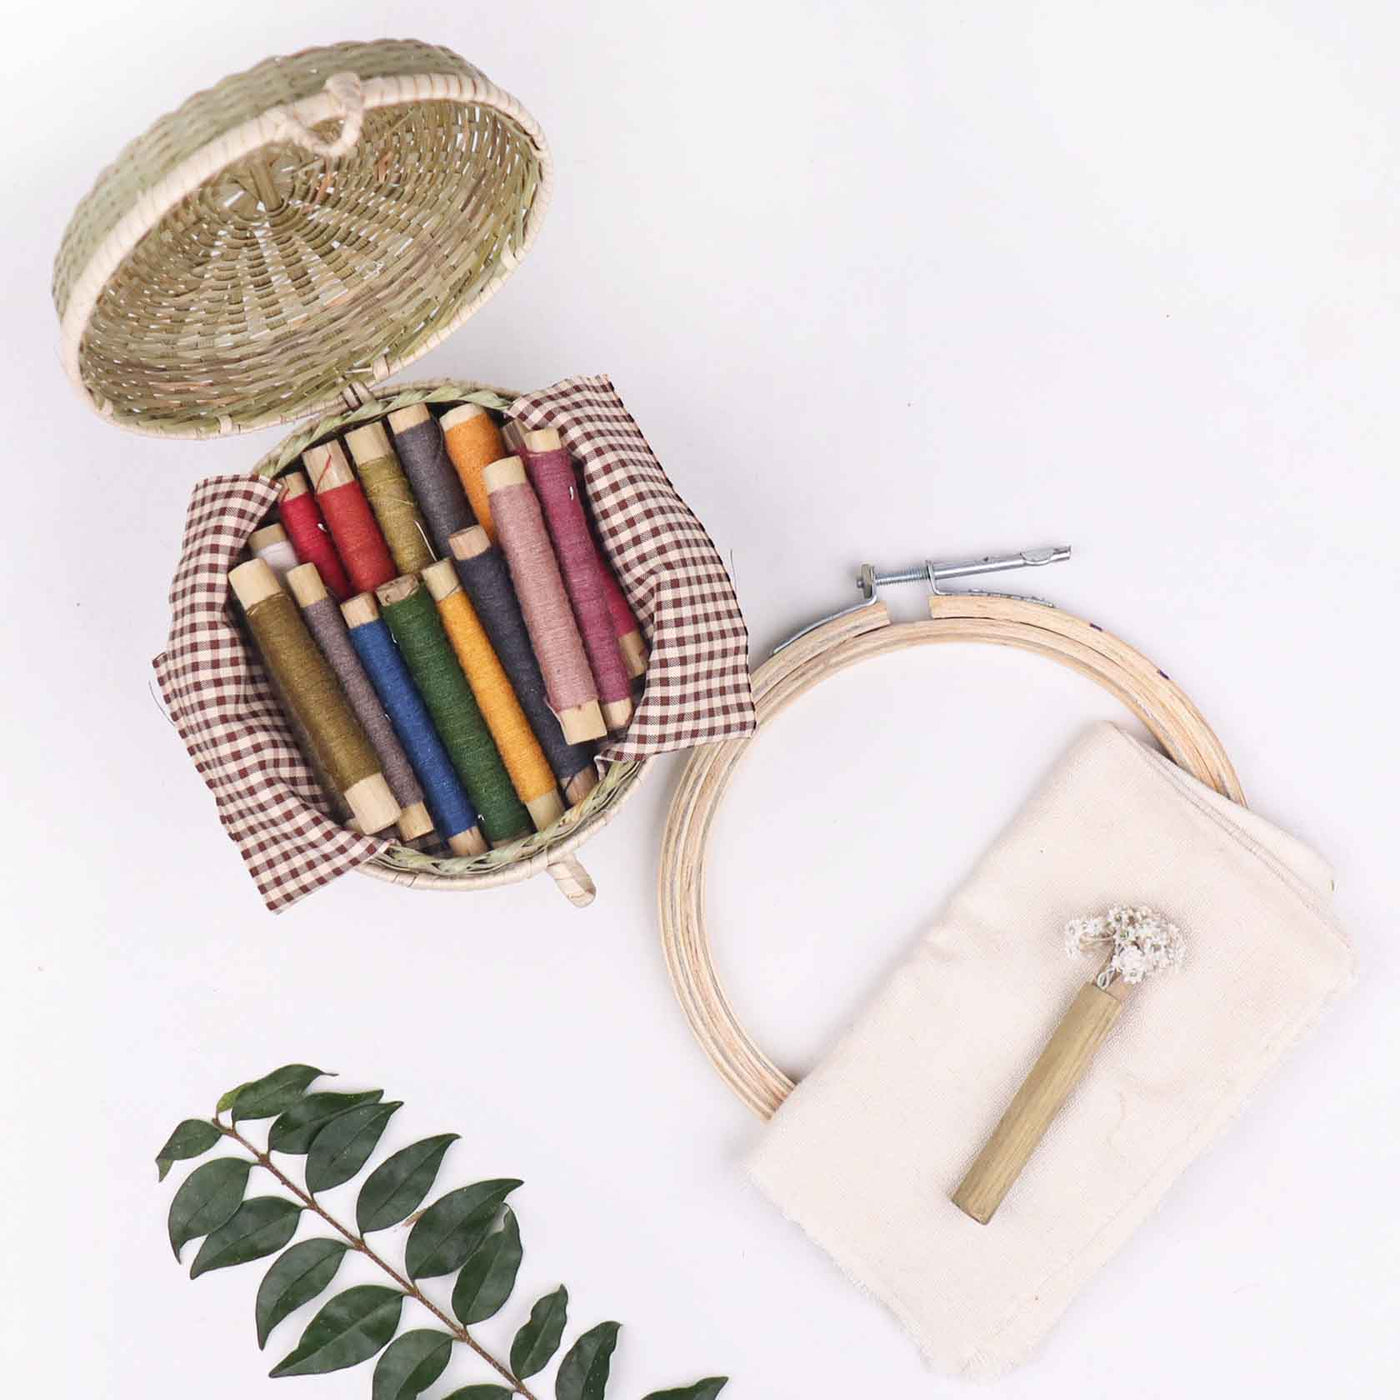 Embroidery Bamboo Basket Gift Kit